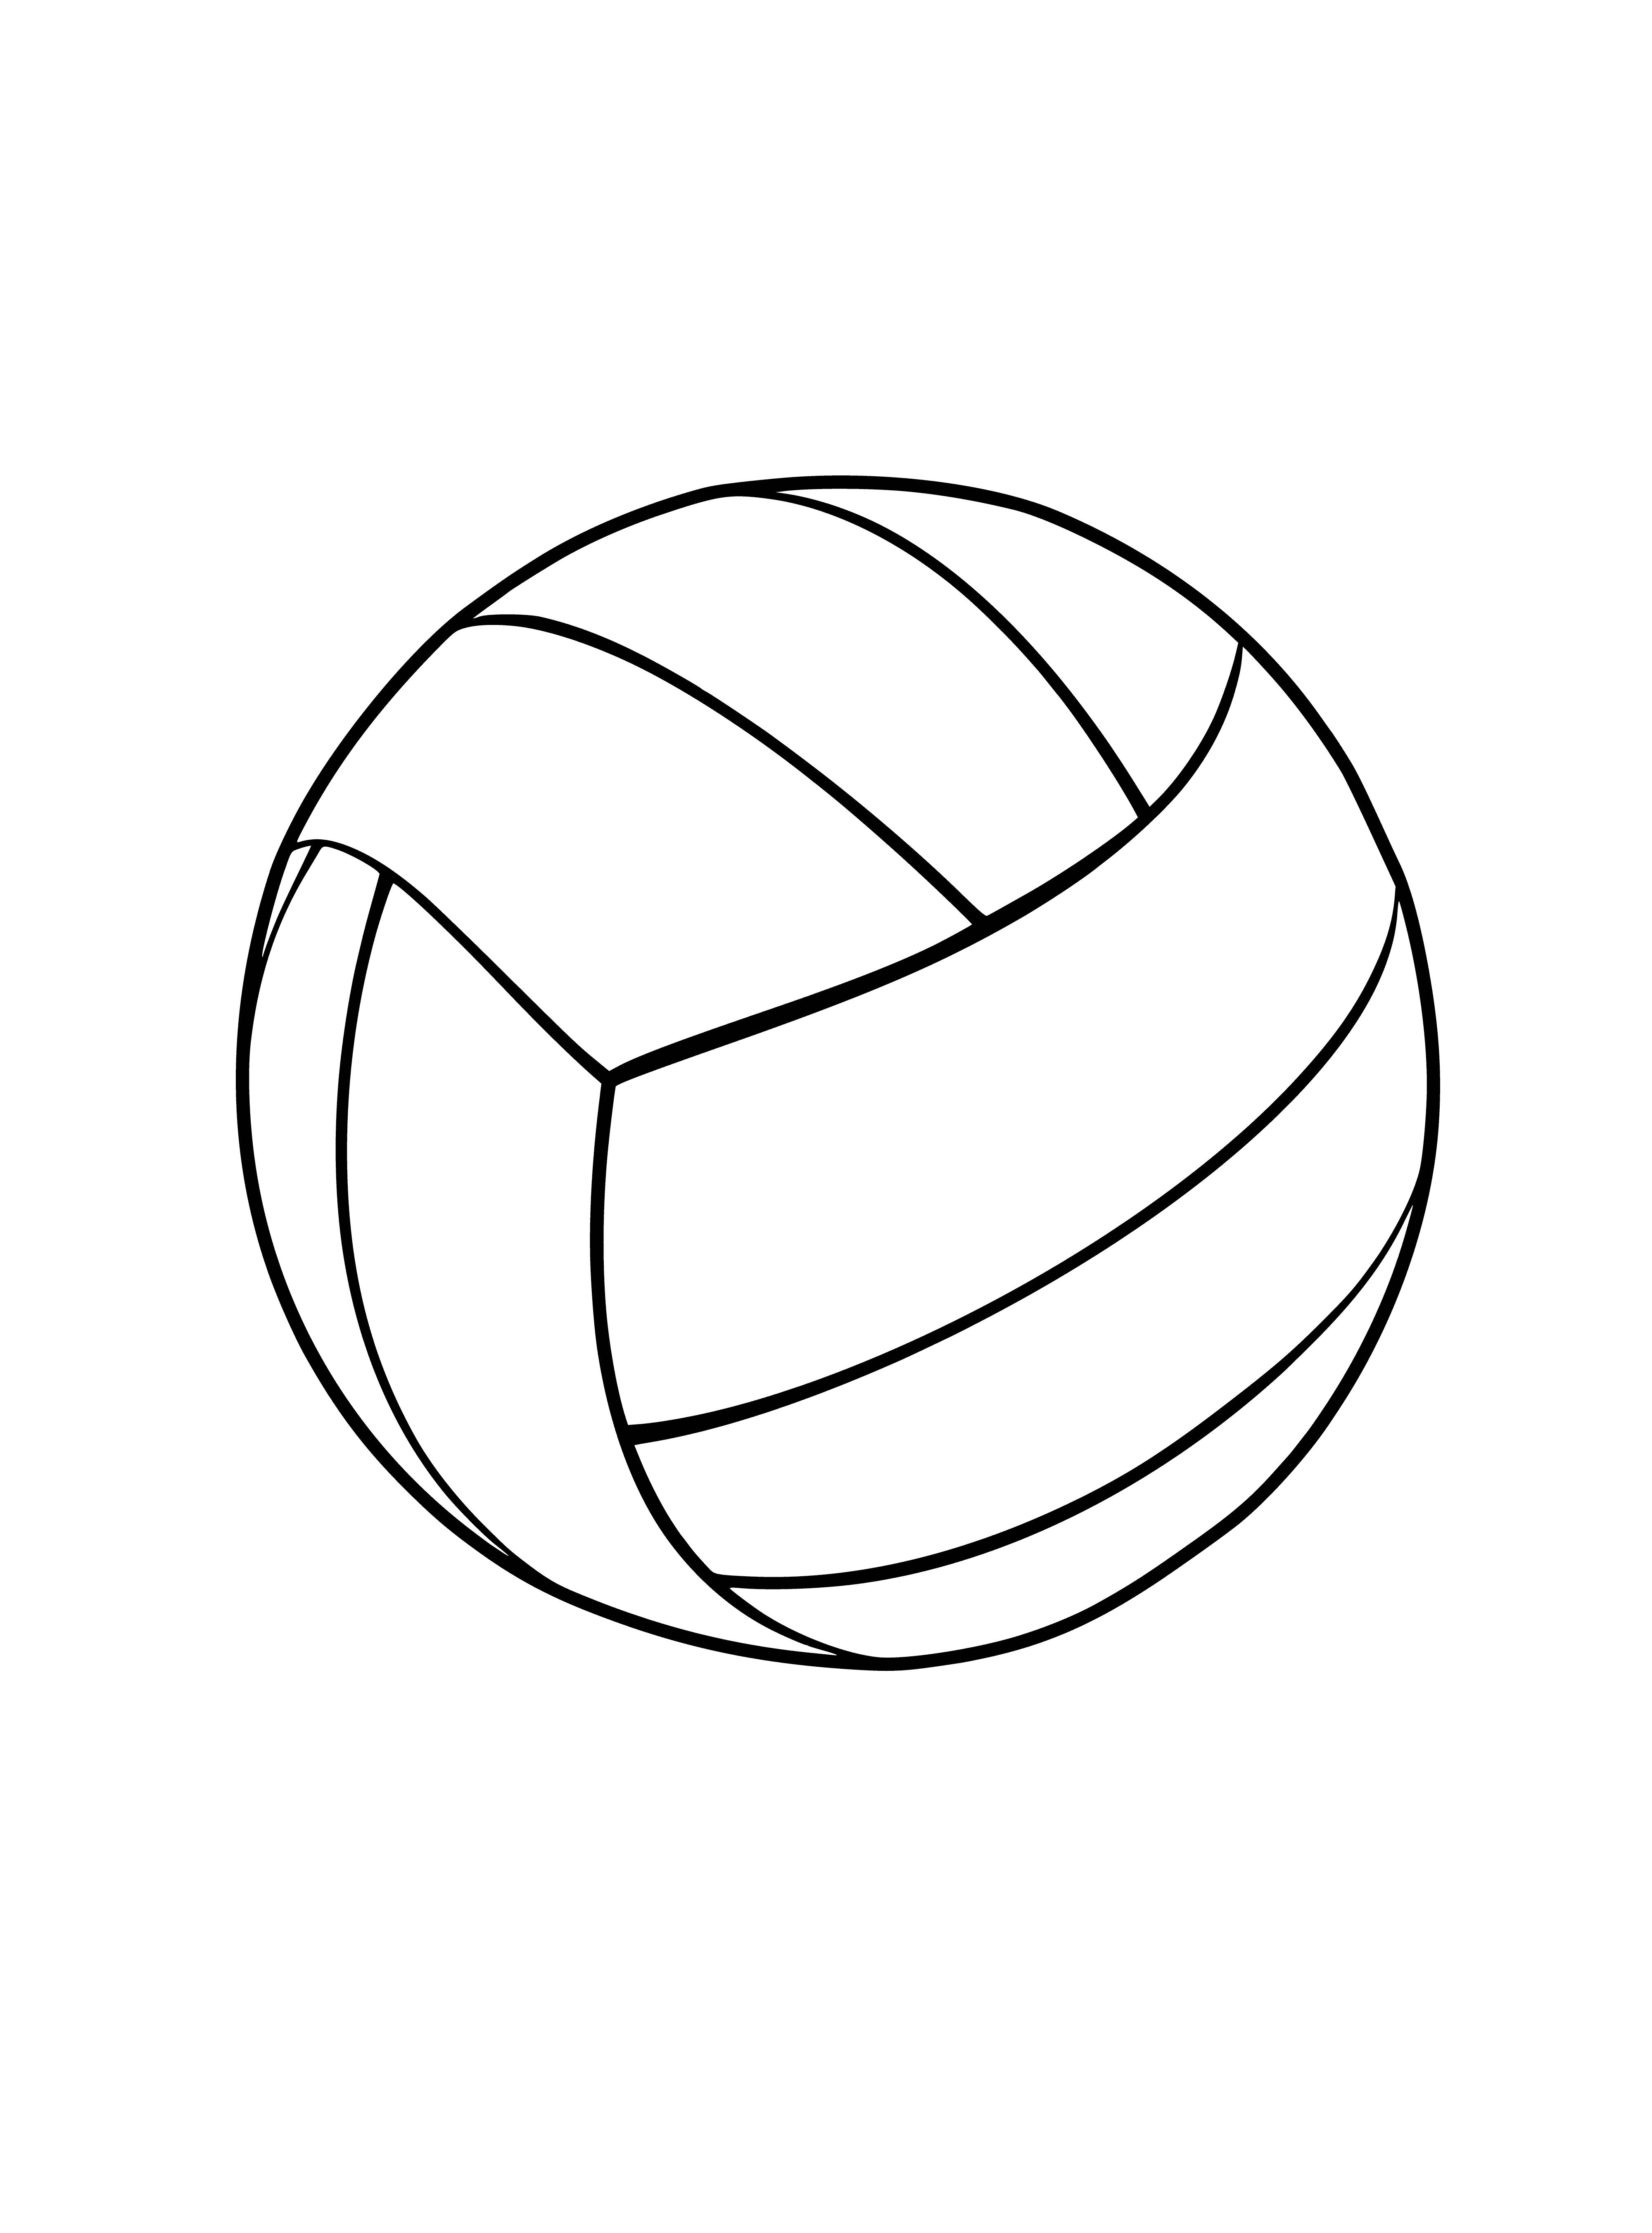 coloring page: Volleyball is a sport played with a slightly-inflated, round ball, usually 25-27 inches in circumference and 9-12 ounces in weight.